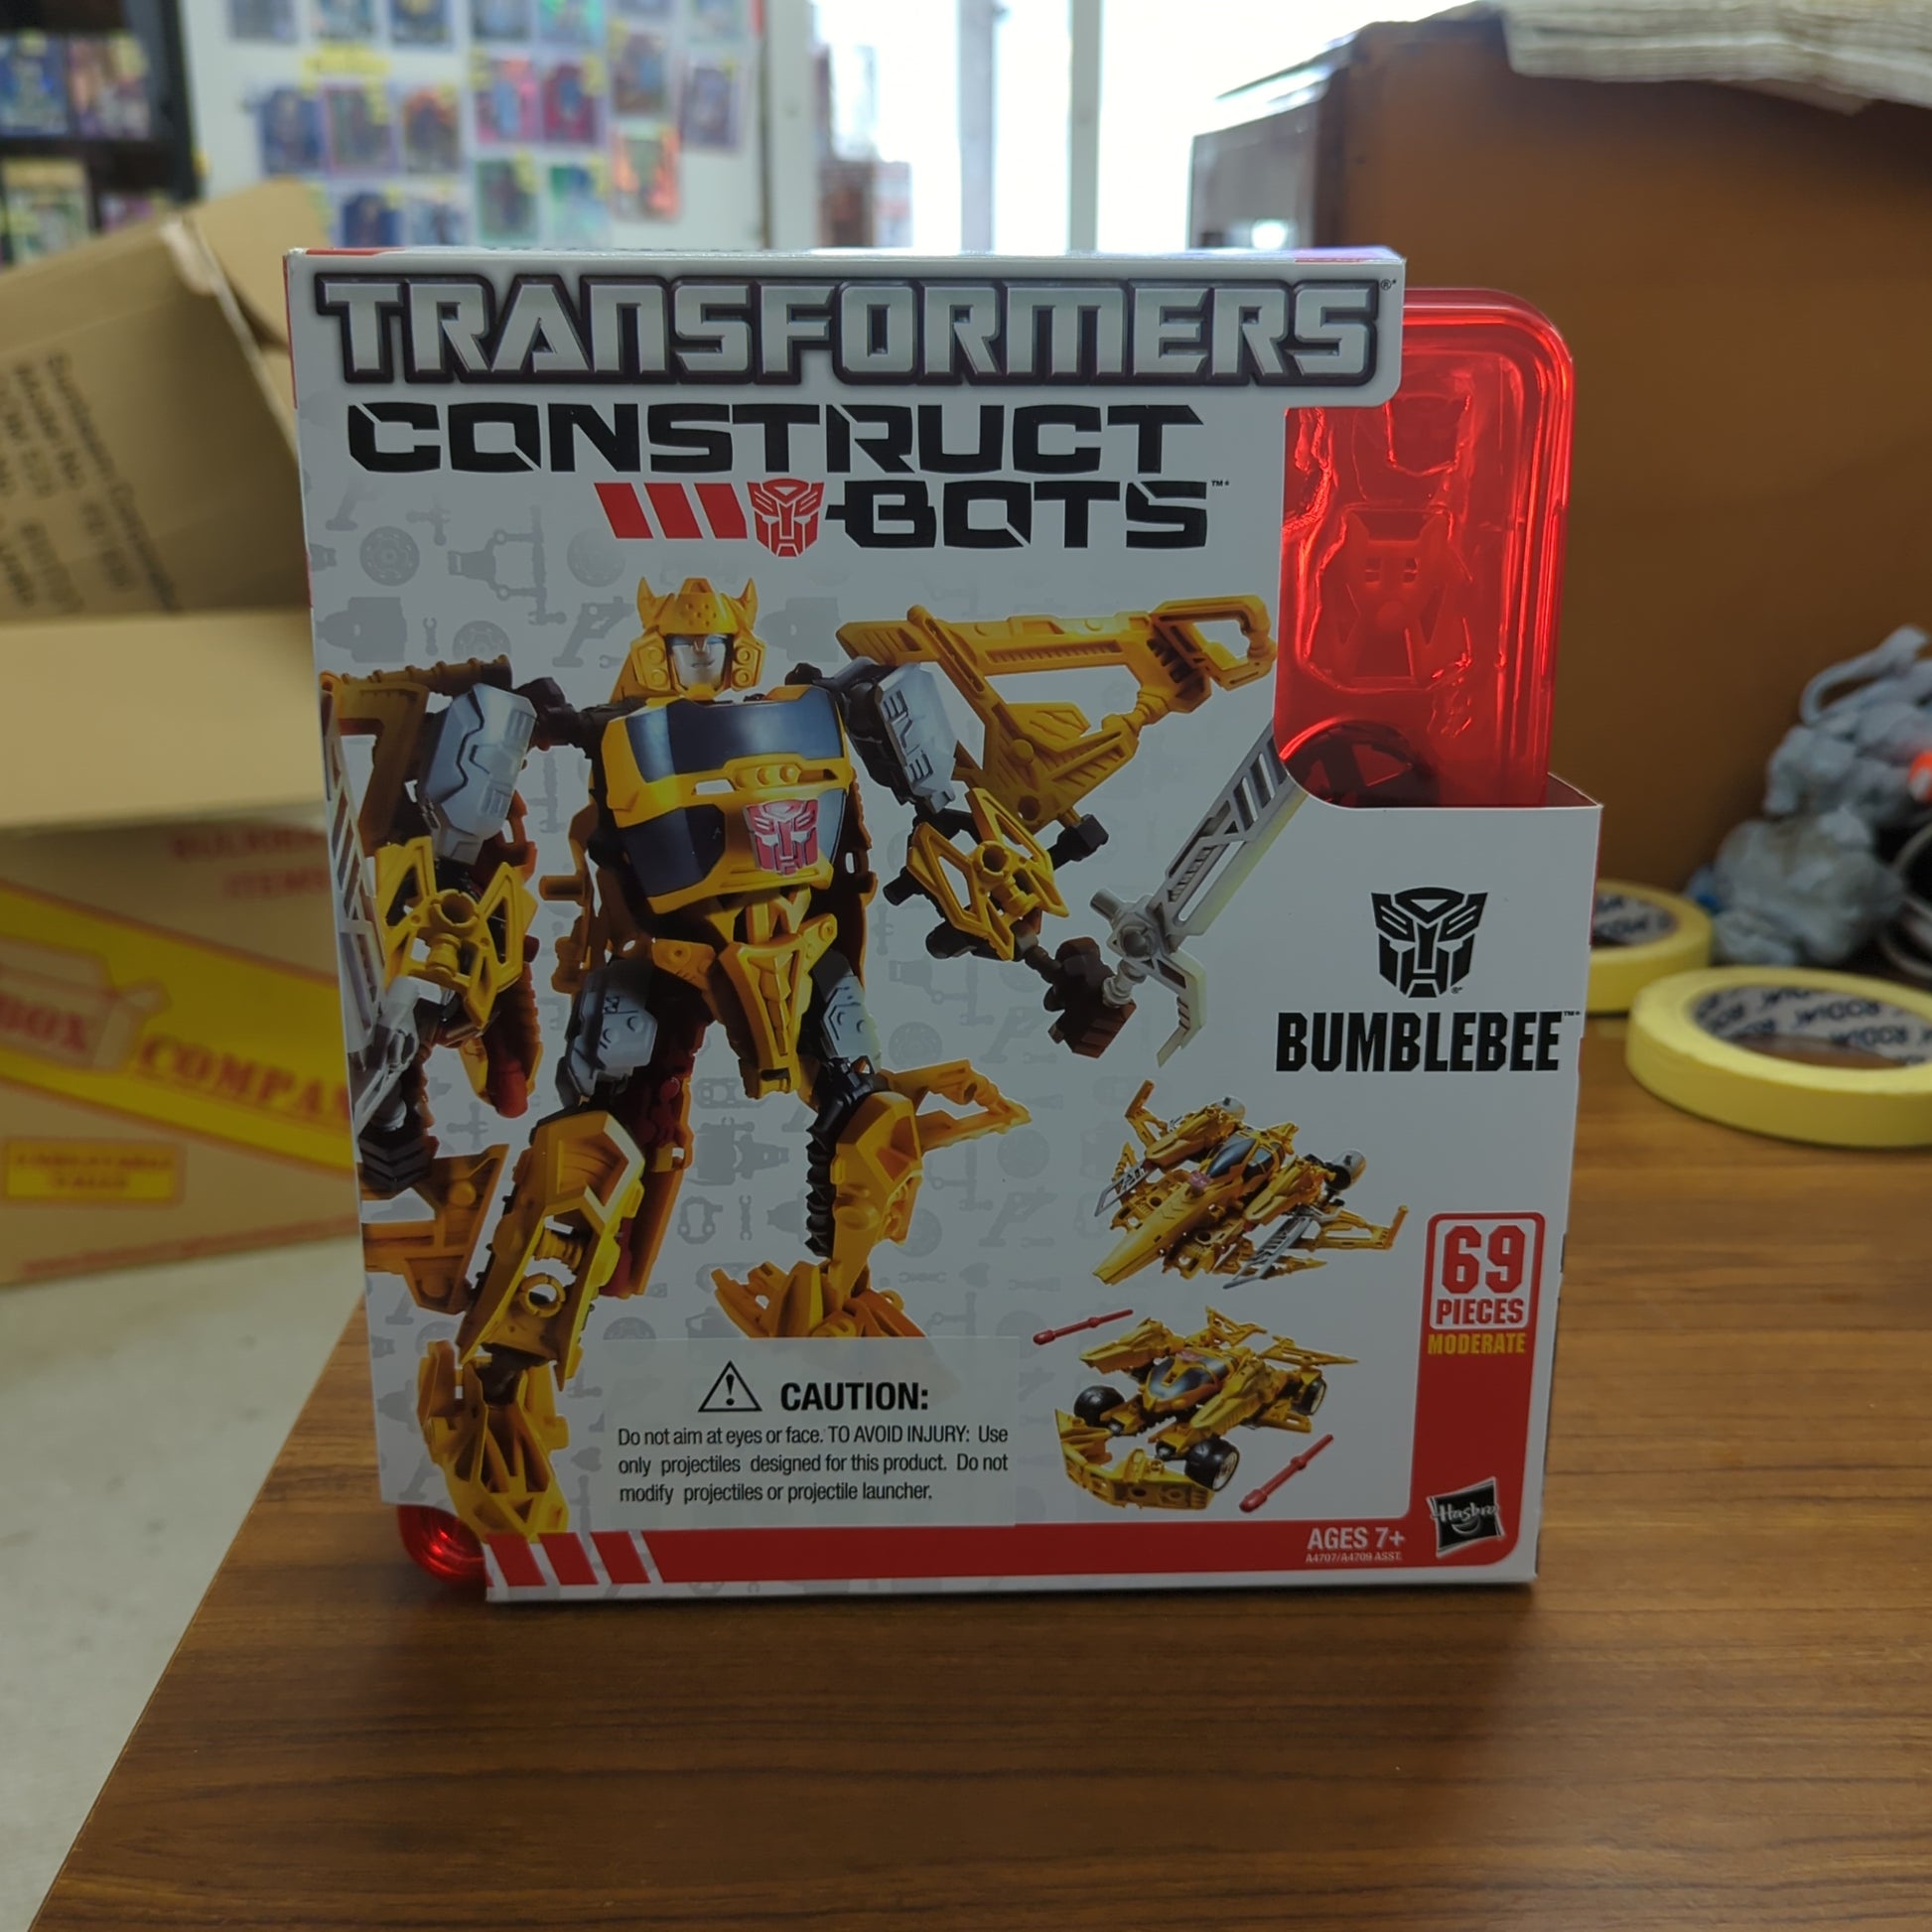 NEW Transformers Construct Bots Bumblebee Triple Changers Tray 69 Pieces Hasbro FRENLY BRICKS - Open 7 Days